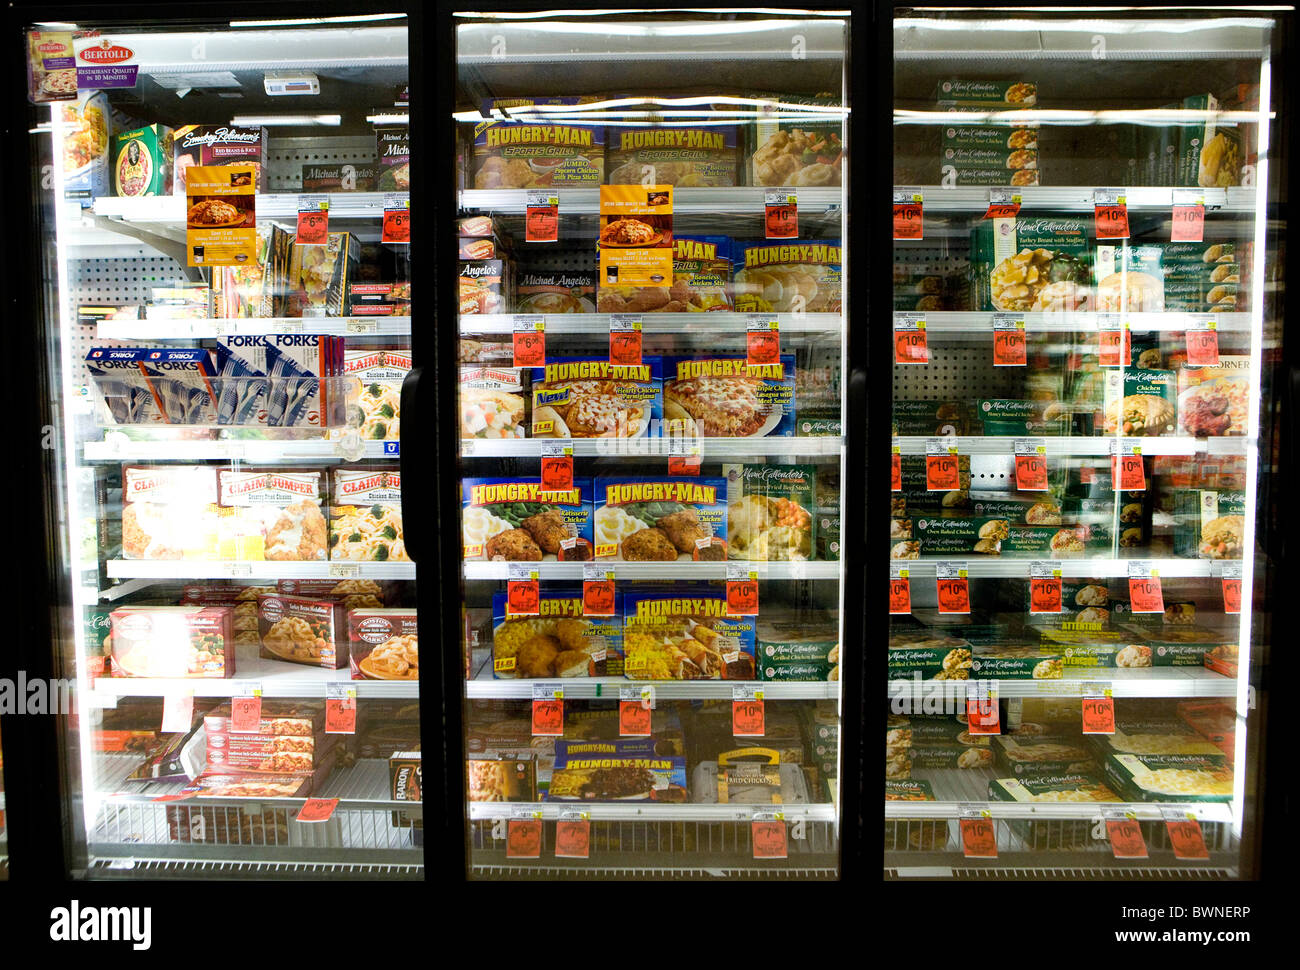 The frozen food display in a grocery store. Stock Photo